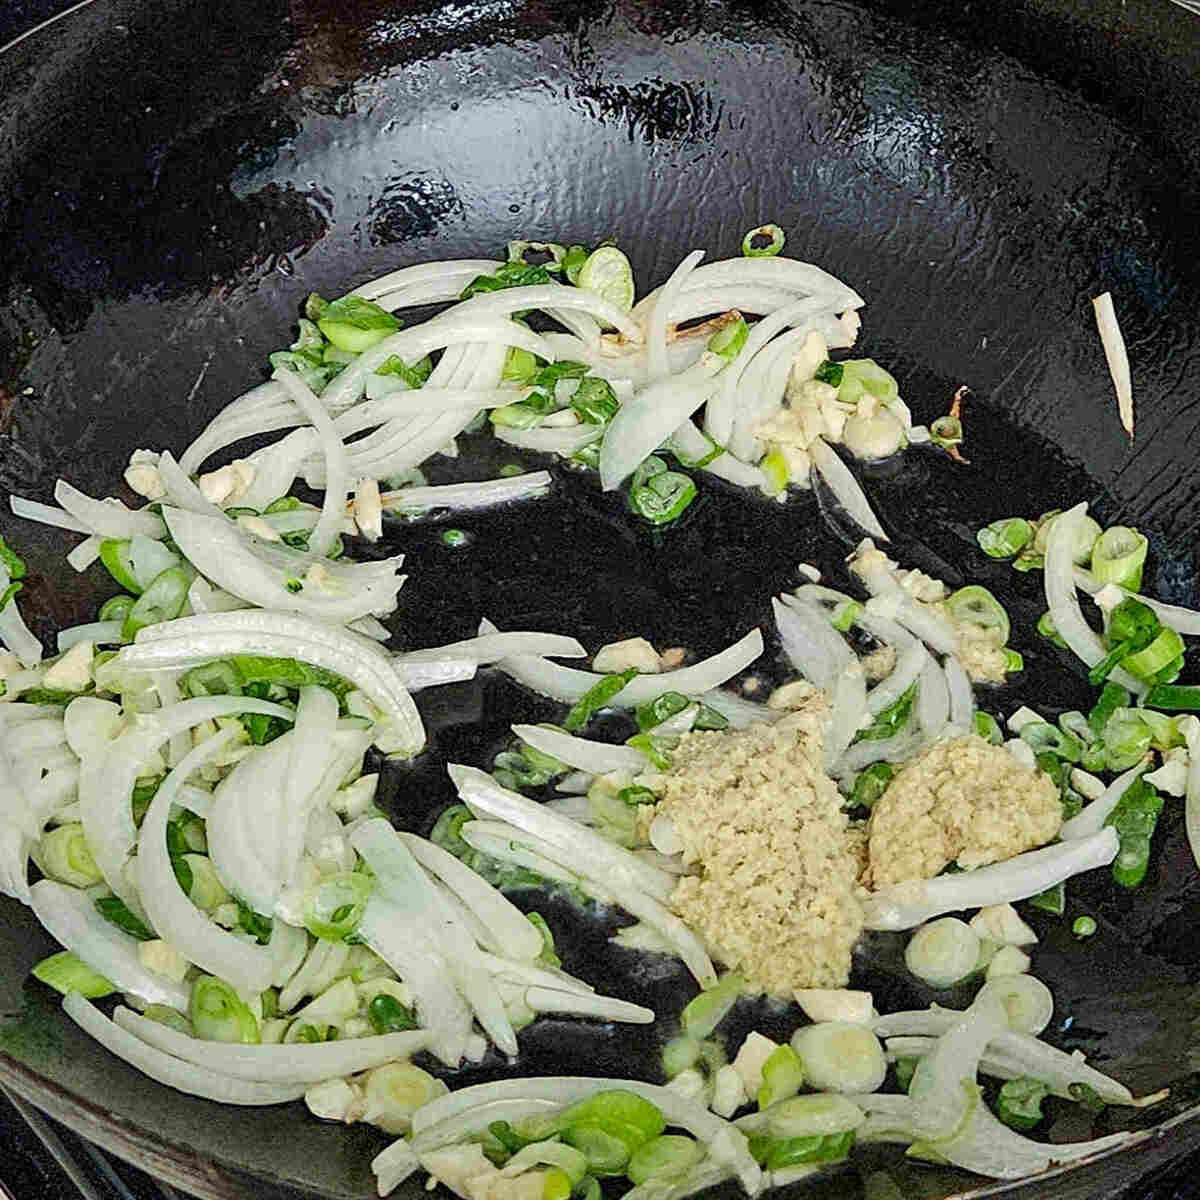 cooking the onions, garlic, and ginger in the wok for the easy Asian vegetable stir fry rice noodles recipe